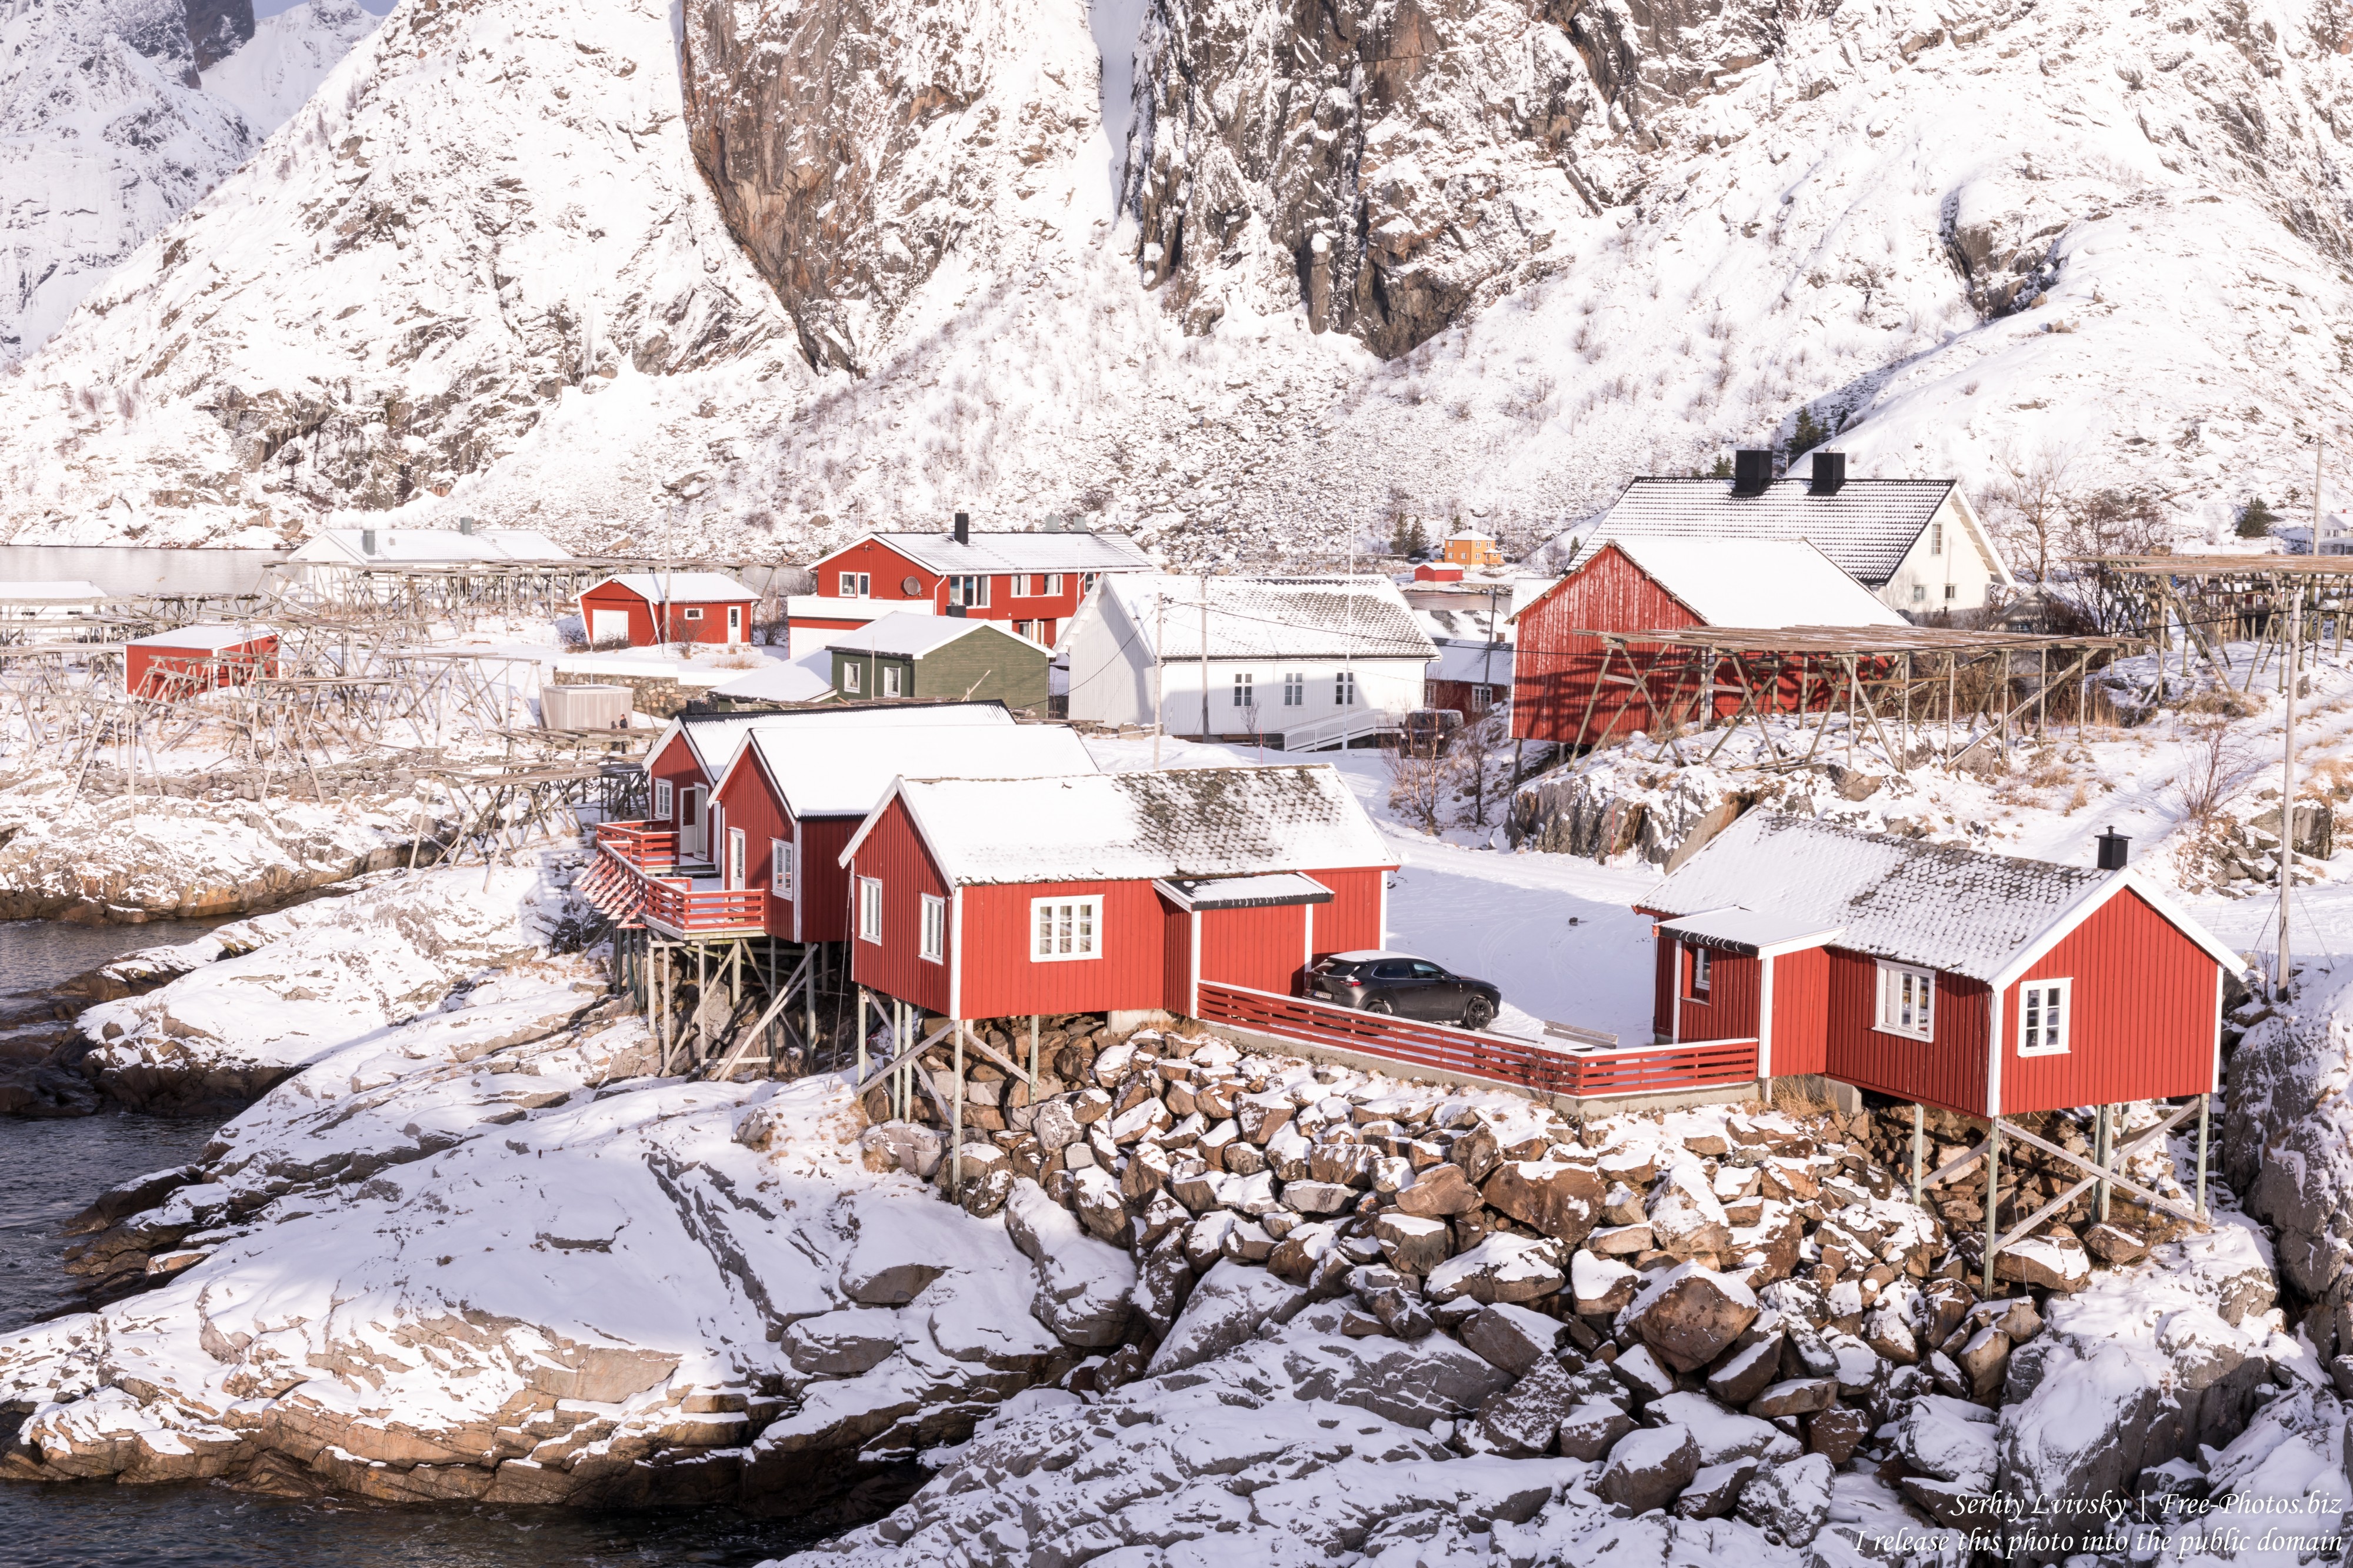 Hamnoy and surroundings, Norway, in February 2020, by Serhiy Lvivsky, picture 13